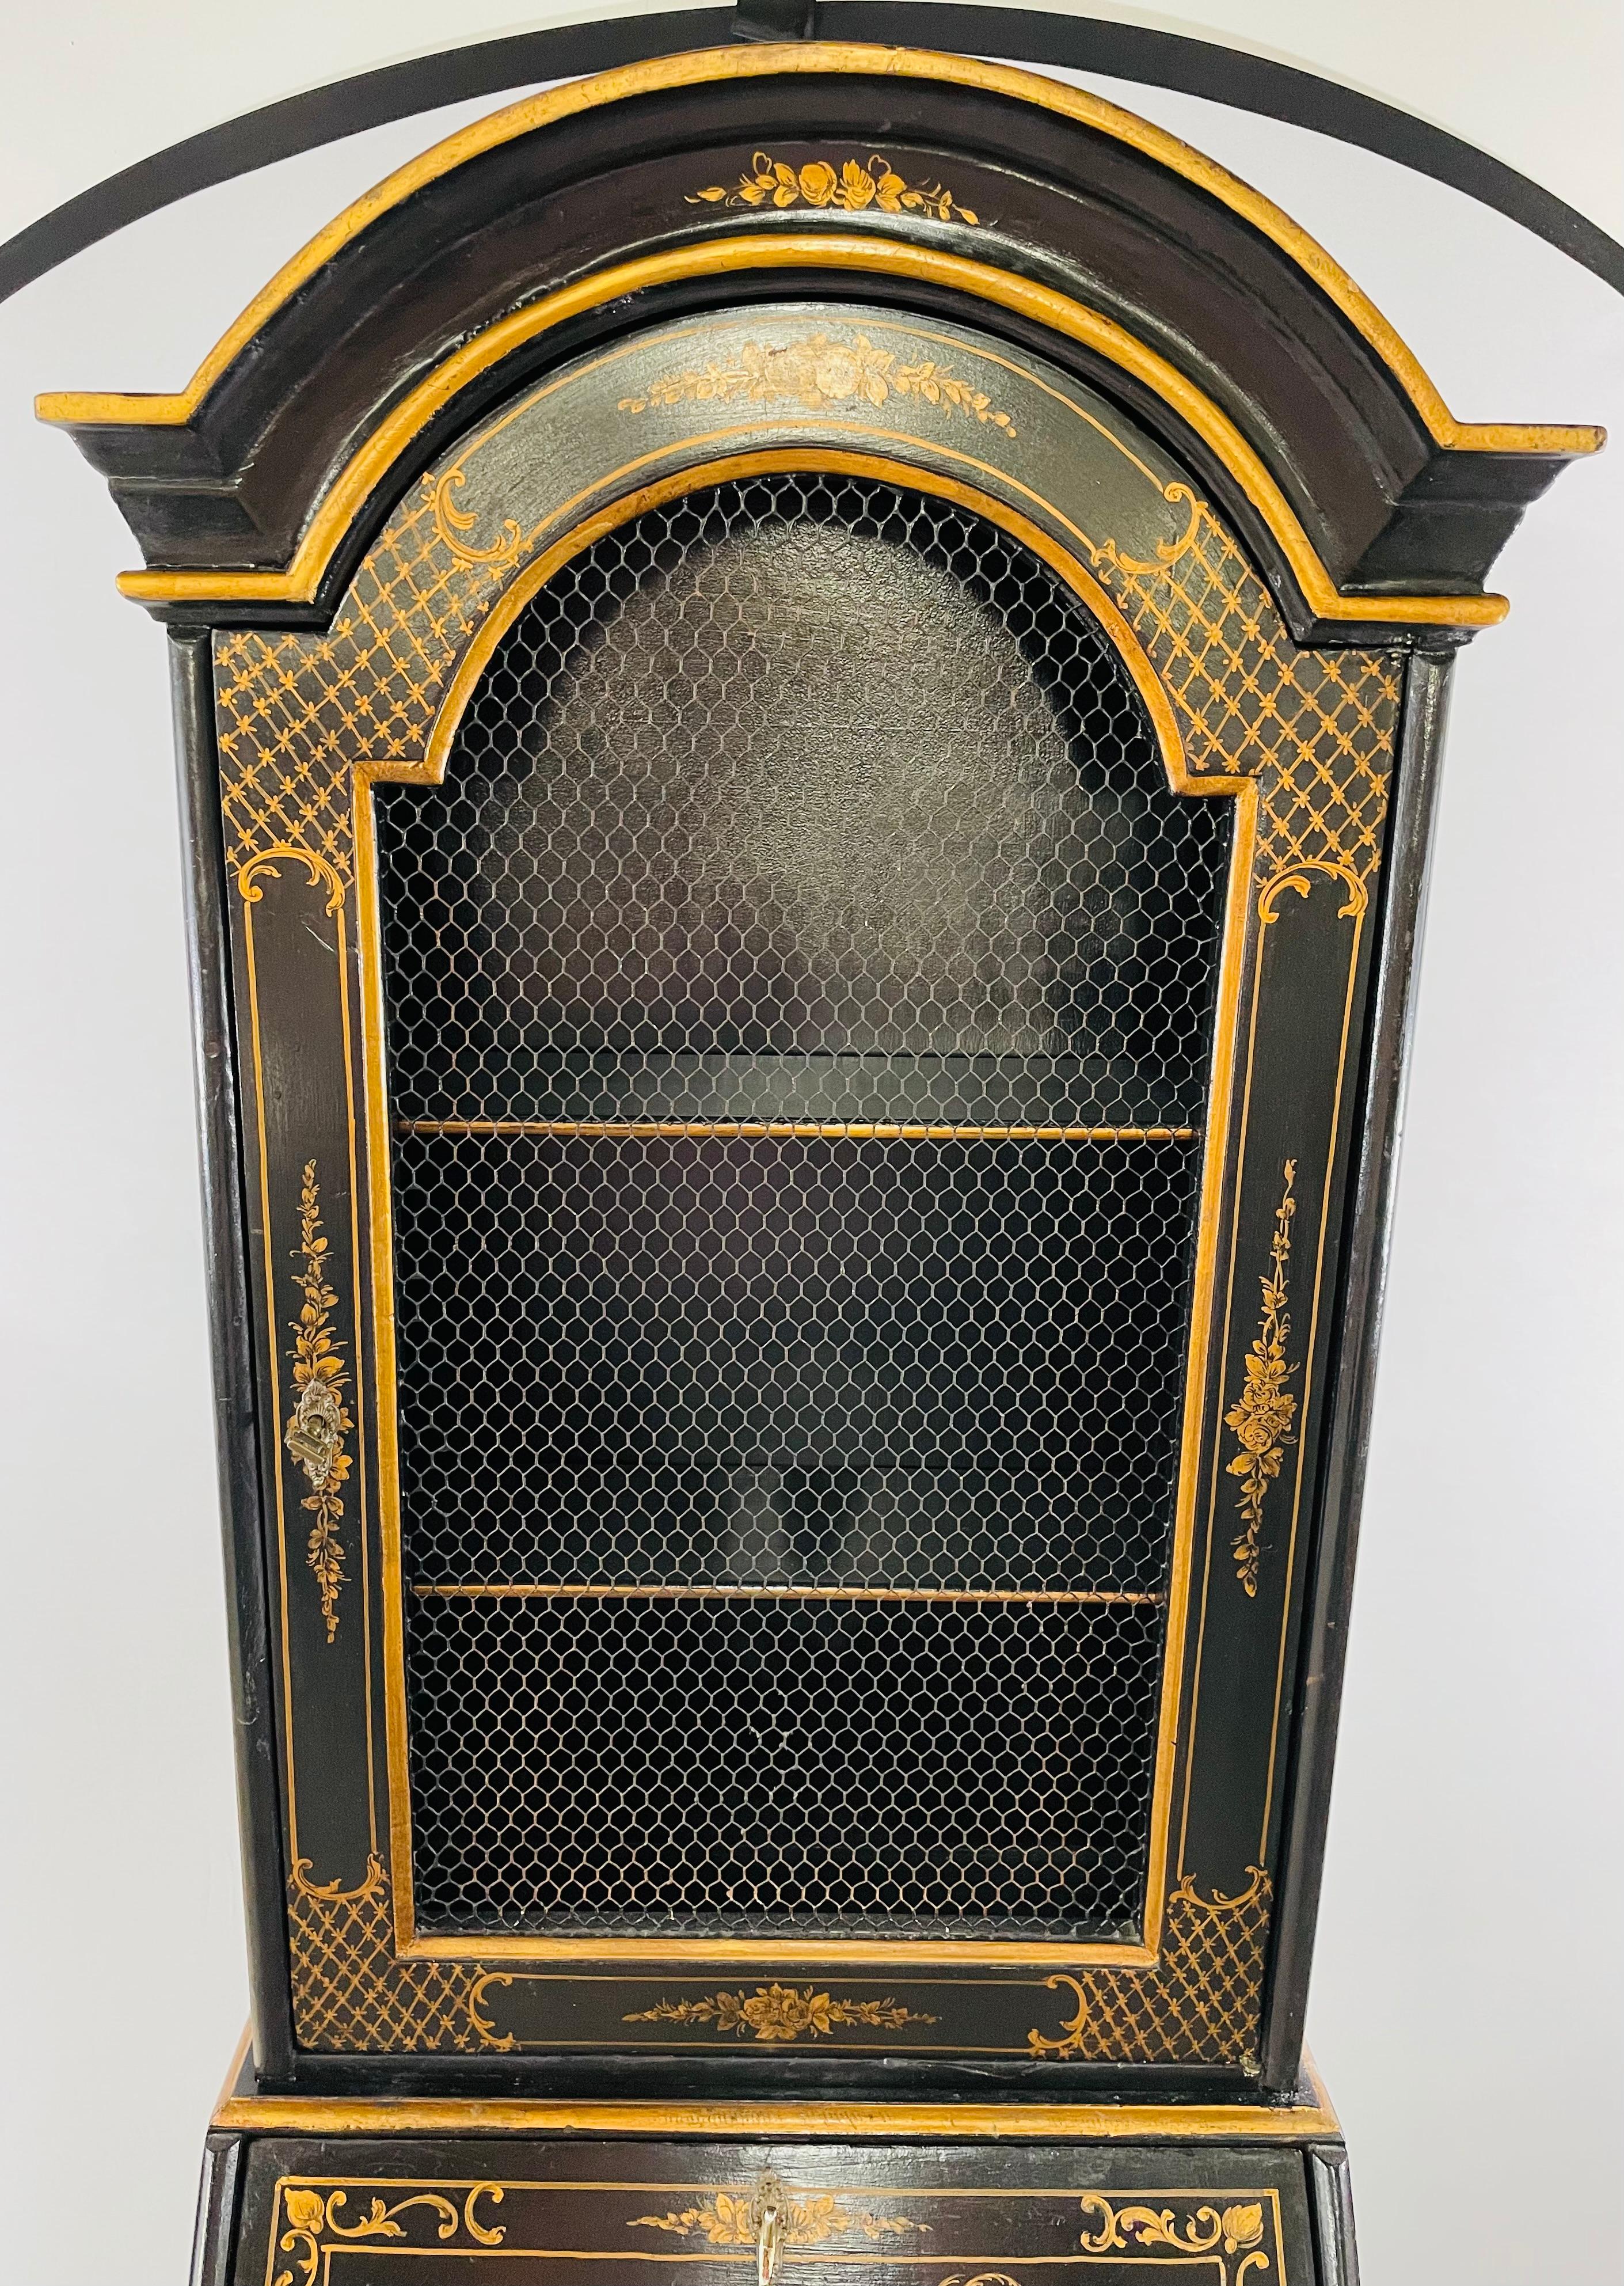 A beautiful Chinoiserie style carved black lacquer secretary desk having a black lacquer and gilt slant top. The secretary desk is made in Italy in the Chinese style and features amazing asian scenes. The two piece secretary has a domed shaped